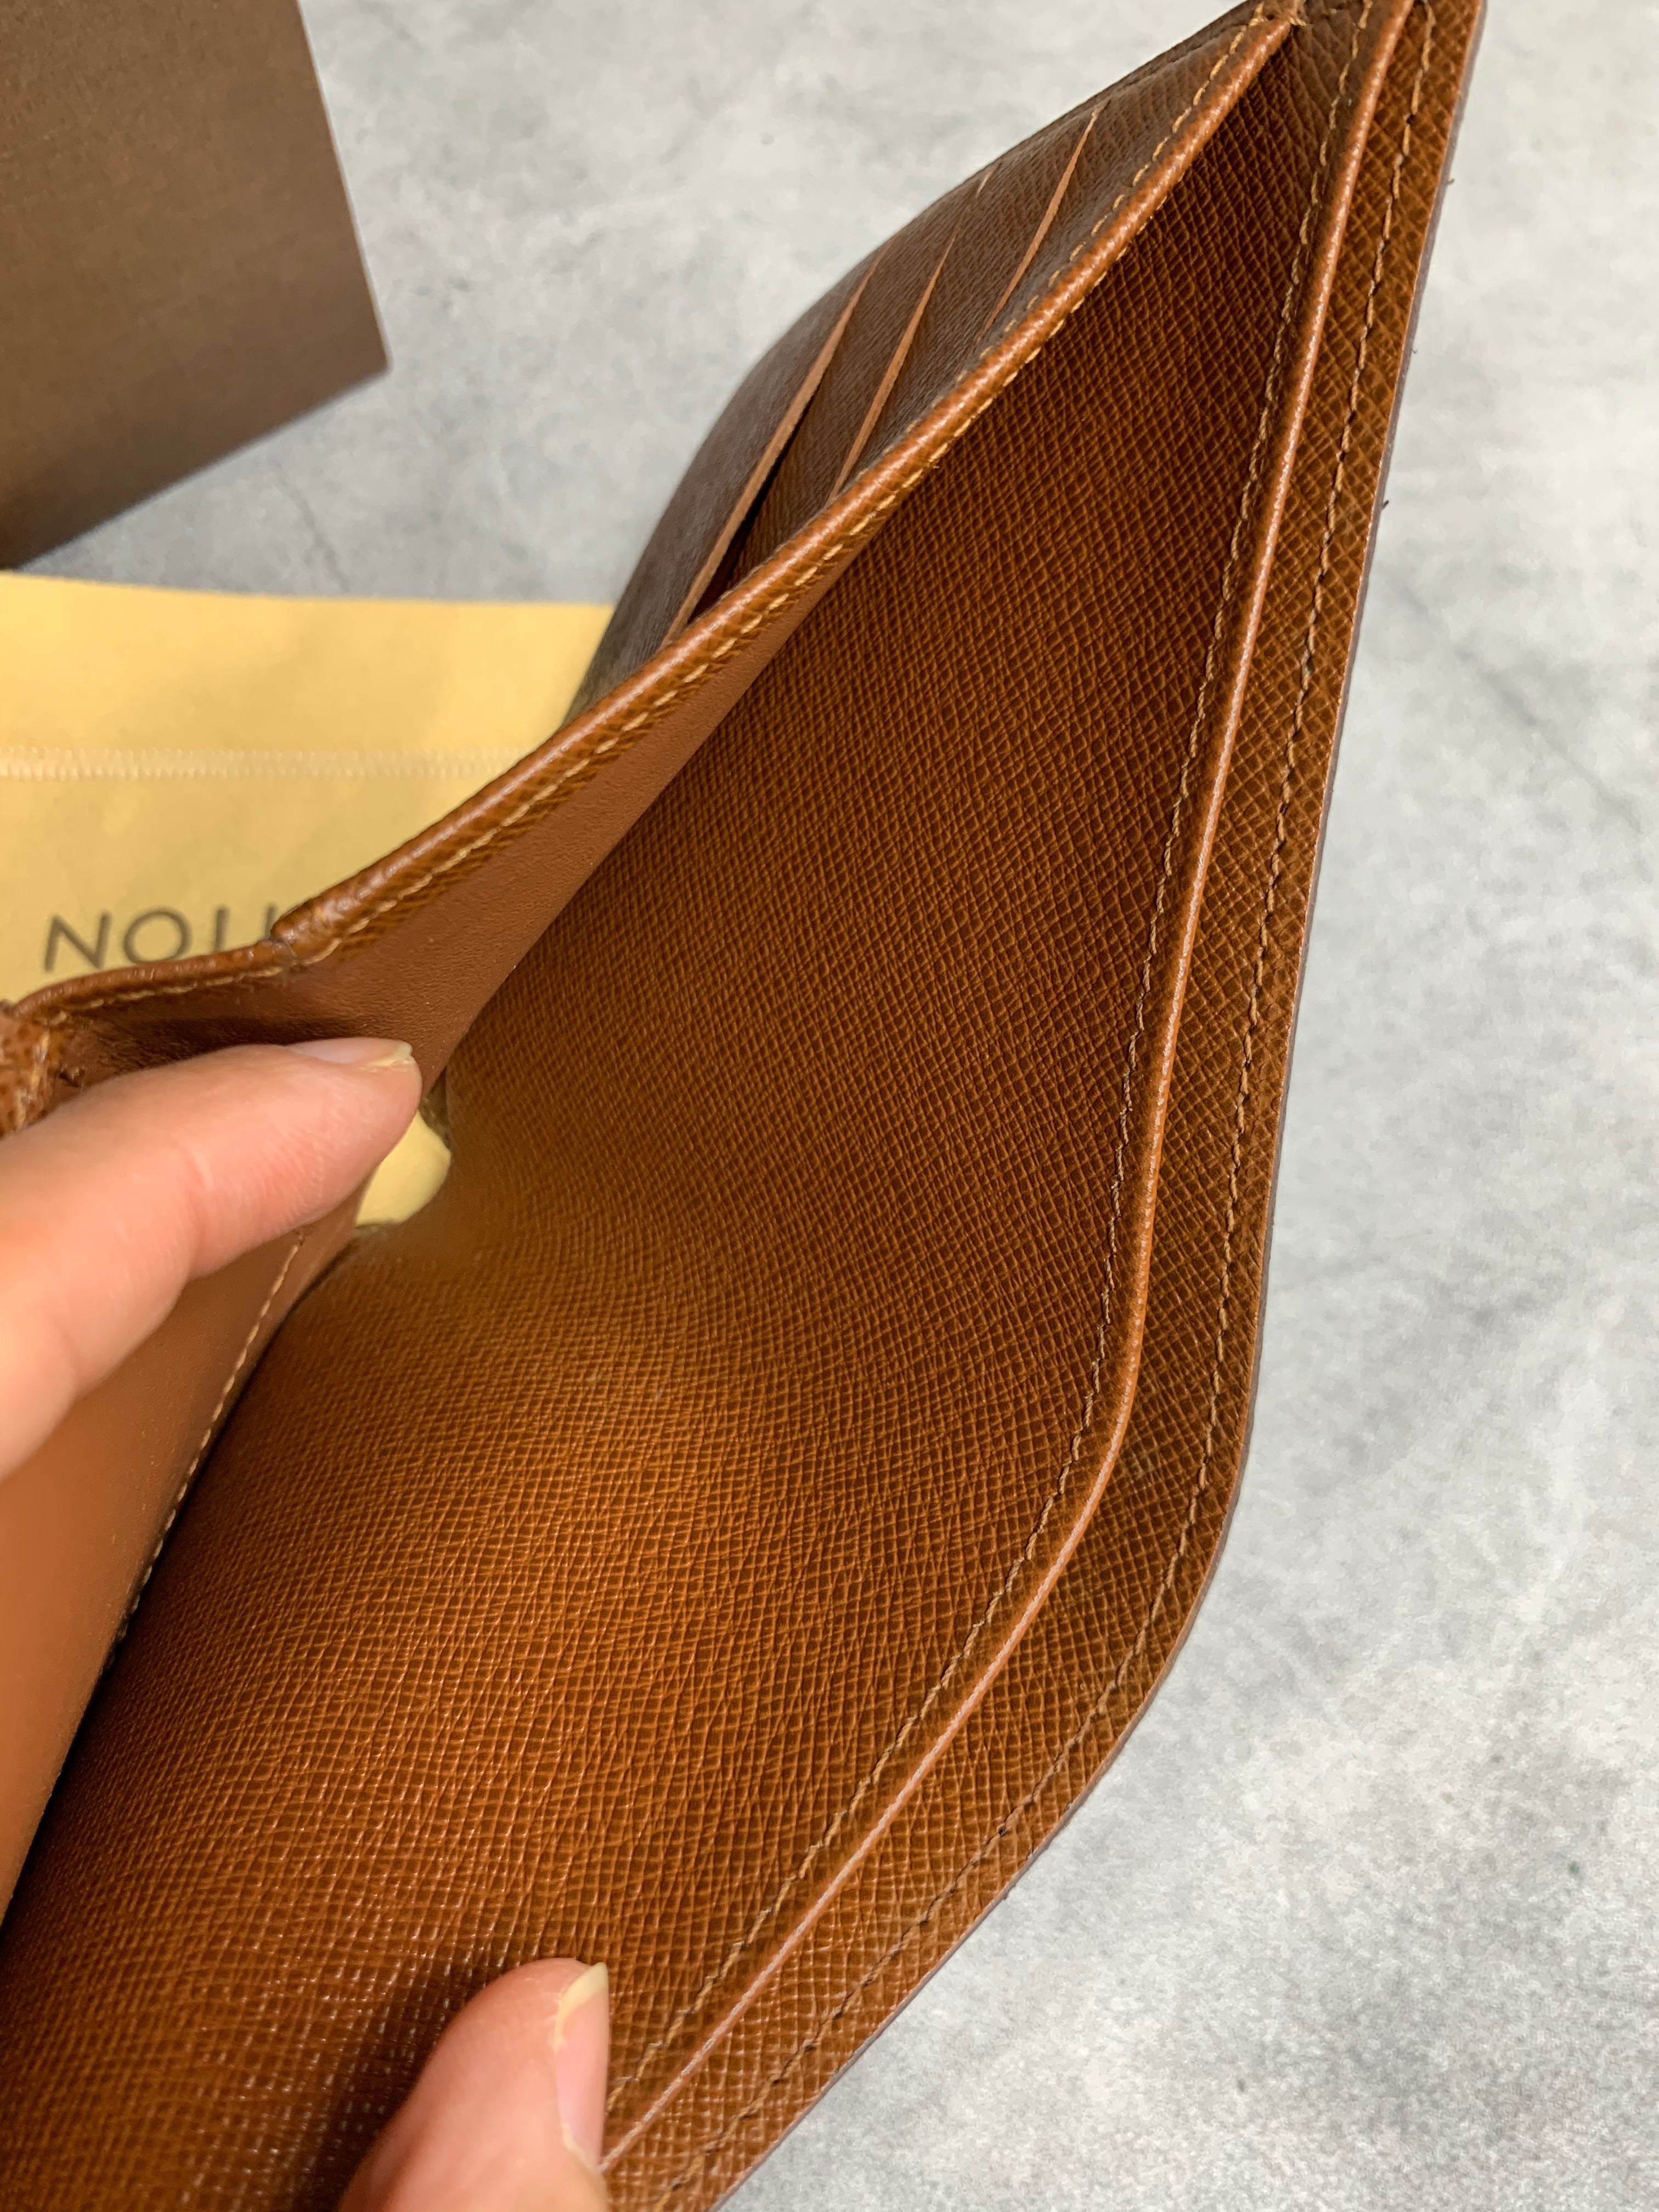 Where can we find date codes in LV wallets?